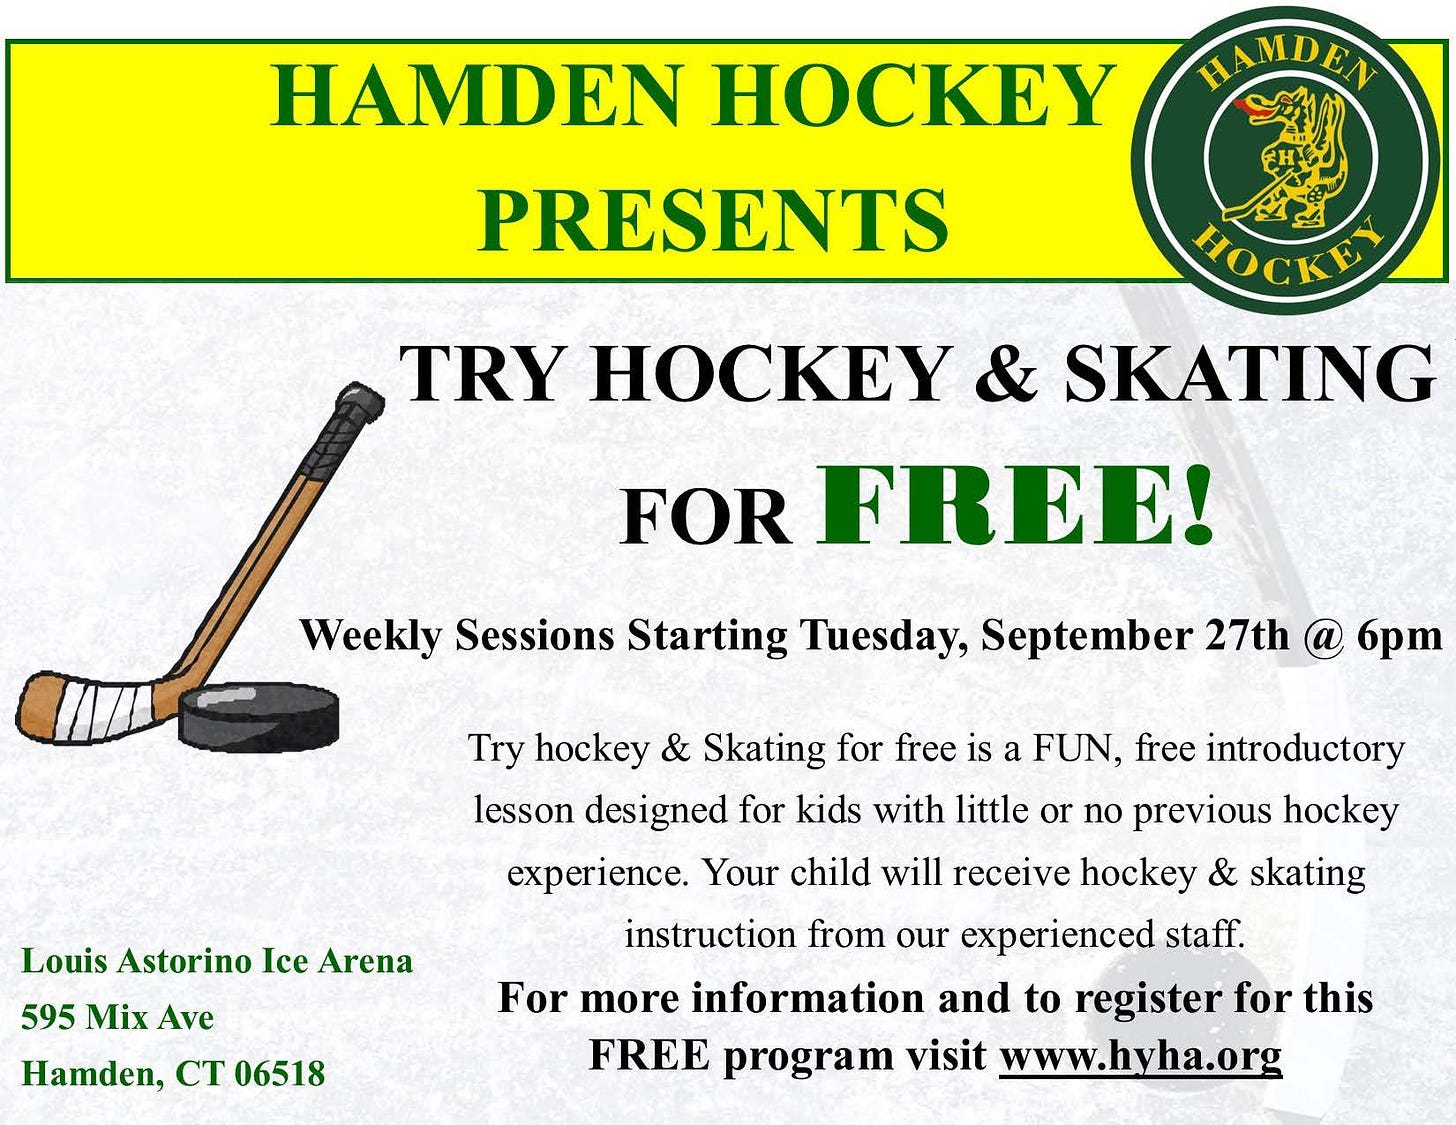 May be an image of text that says 'HAMDEN HOCKEY PRESENTS HAMDEN HOCKEY TRY HOCKEY & SKATING FOR FREE! Weekly Sessions Starting Tuesday, September 27th 6pm Louis Astorino Ice Arena Try hockey & Skating for free is a FUN, free introductory lesson designed for kids with little or no previous hockey experience. Your child will receive hockey & skating instruction from our experienced staff. For more information and to register for this FREE program visit www.hyha.org 595 Mix Ave Hamden, CT 06518'